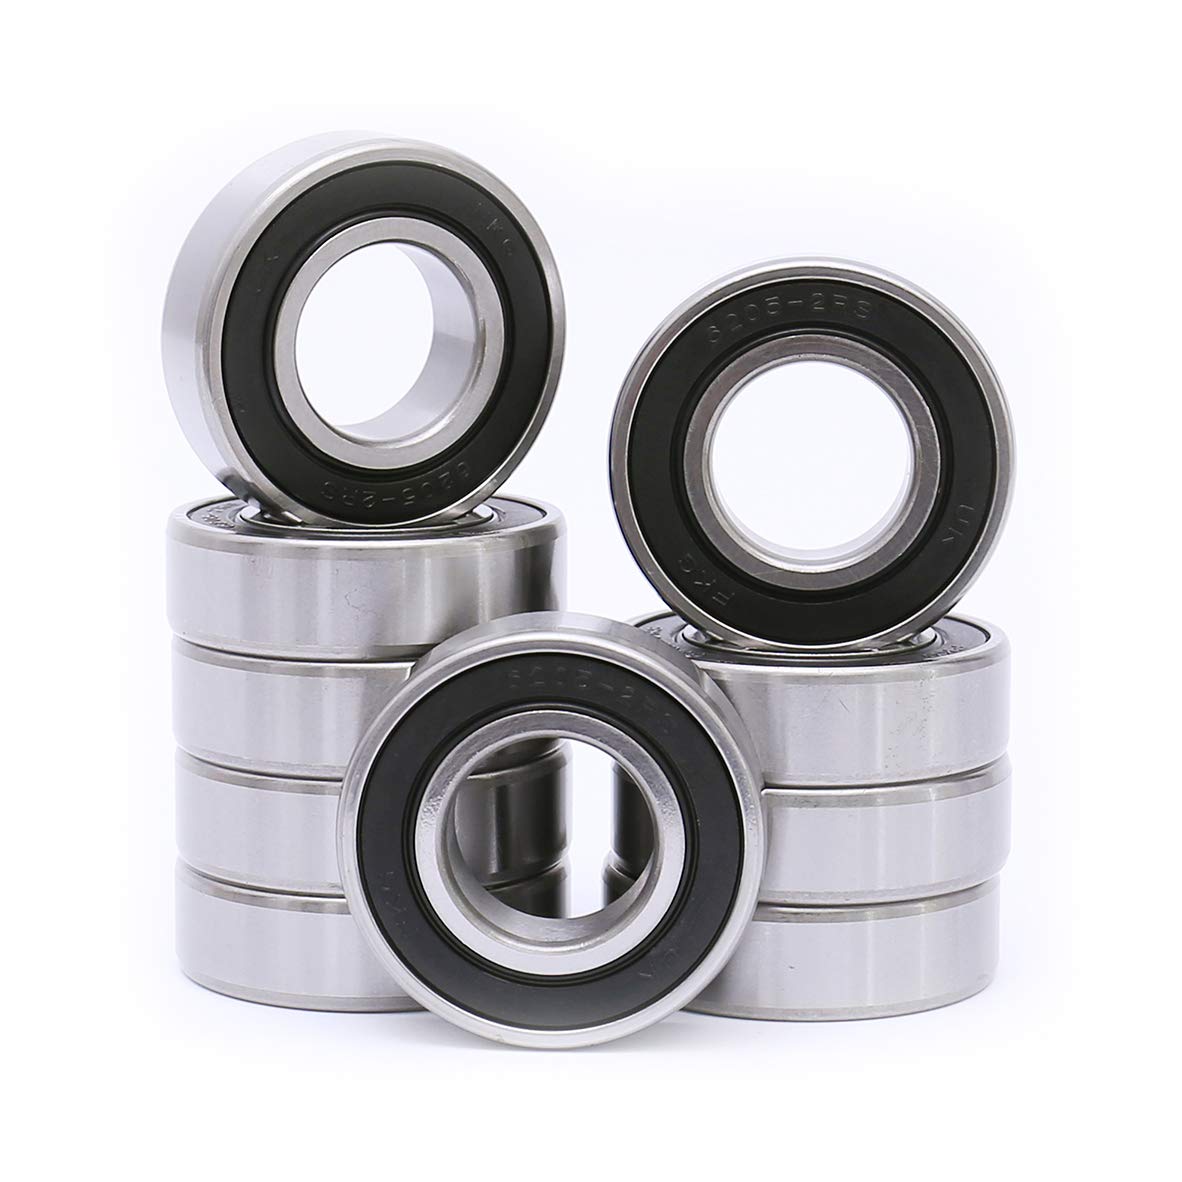 Fkg 6205-2Rs 25X52X15Mm Deep Groove Ball Bearing Double Rubber Seal Bearings Pre-Lubricated 10 Pcs